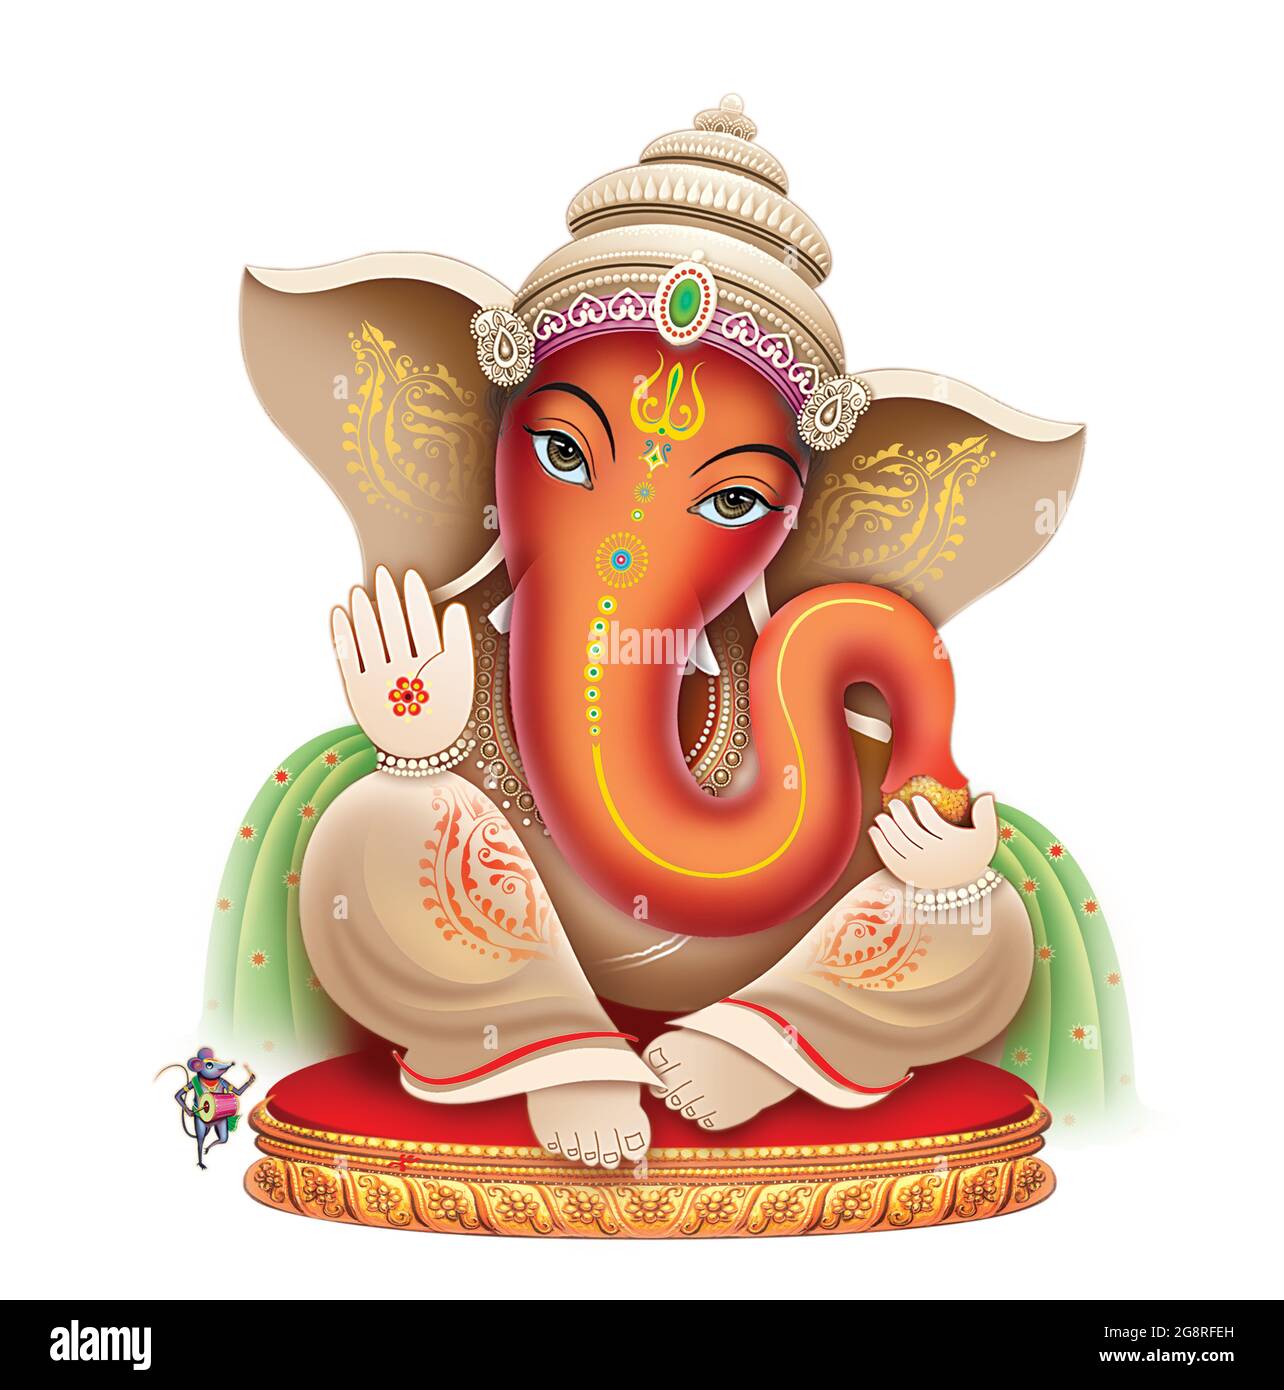 Browse high resolution stock images of Indian Lord Ganesha. Find ...